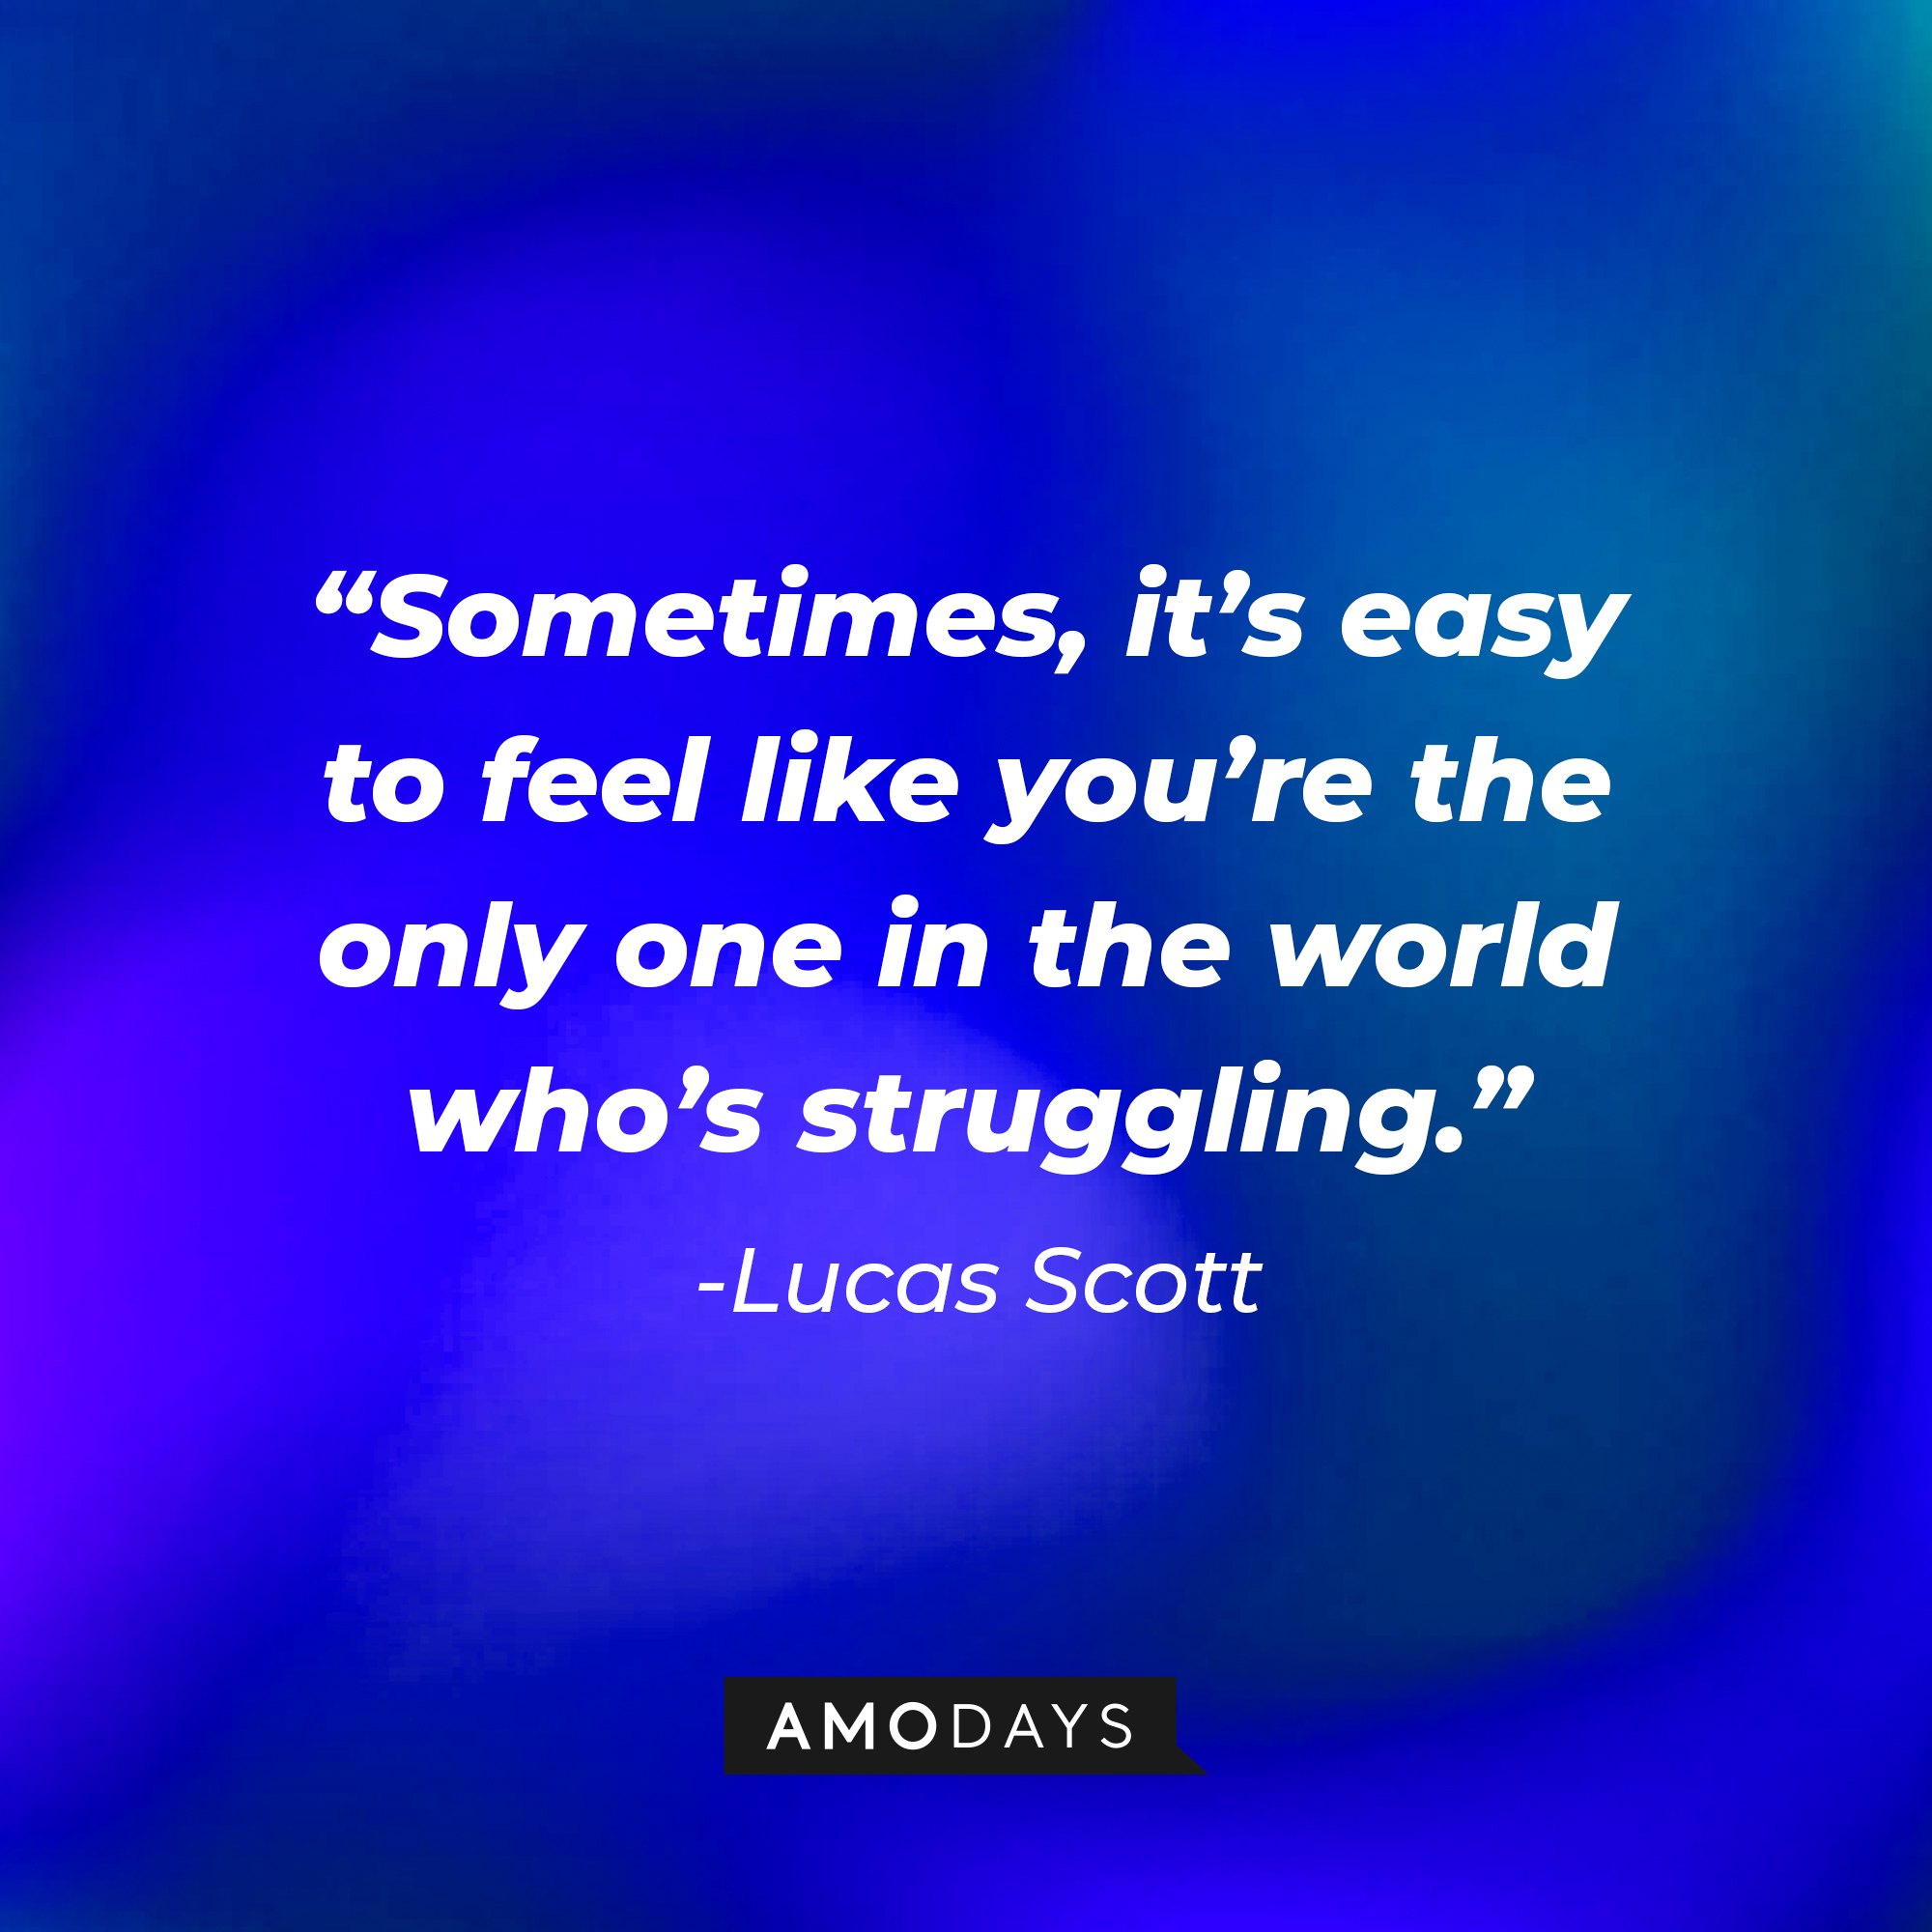 Lucas Scott’s quote: “Sometimes, it’s easy to feel like you’re the only one in the world who’s struggling.”  |Source:facebook.com/OneTreeHill